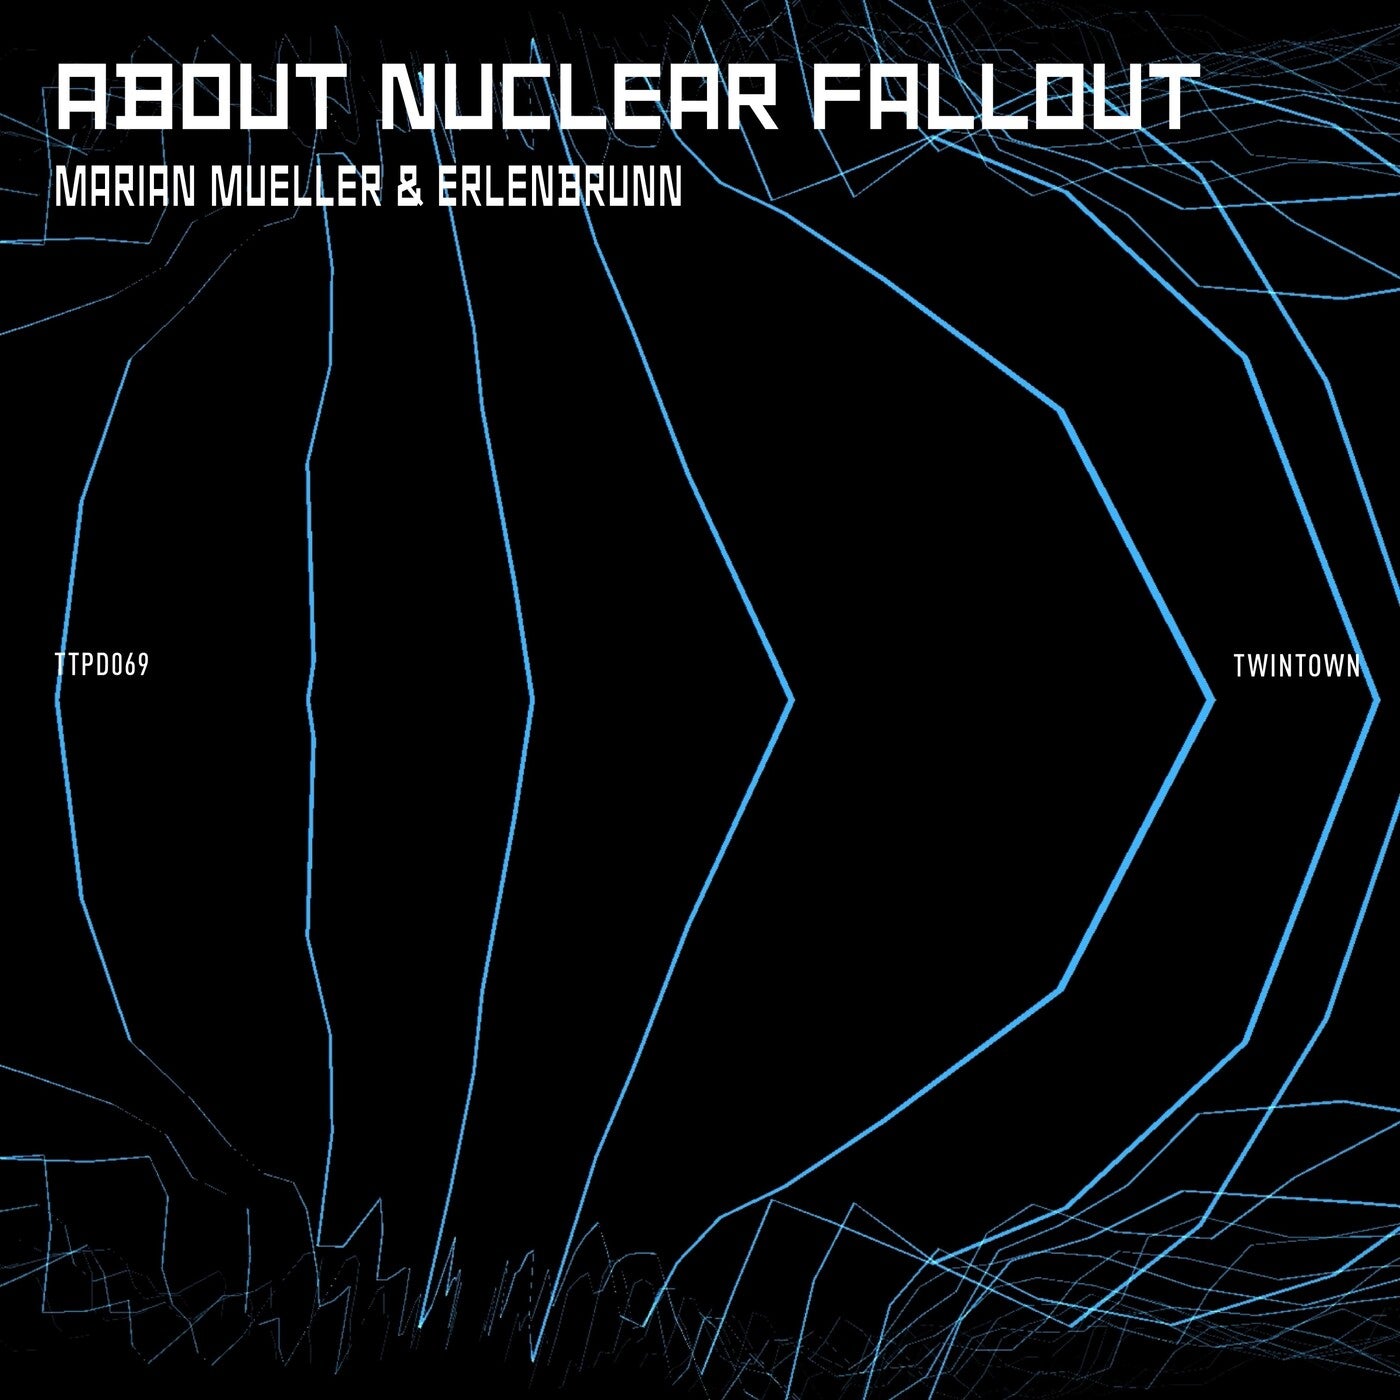 About Nuclear Fallout